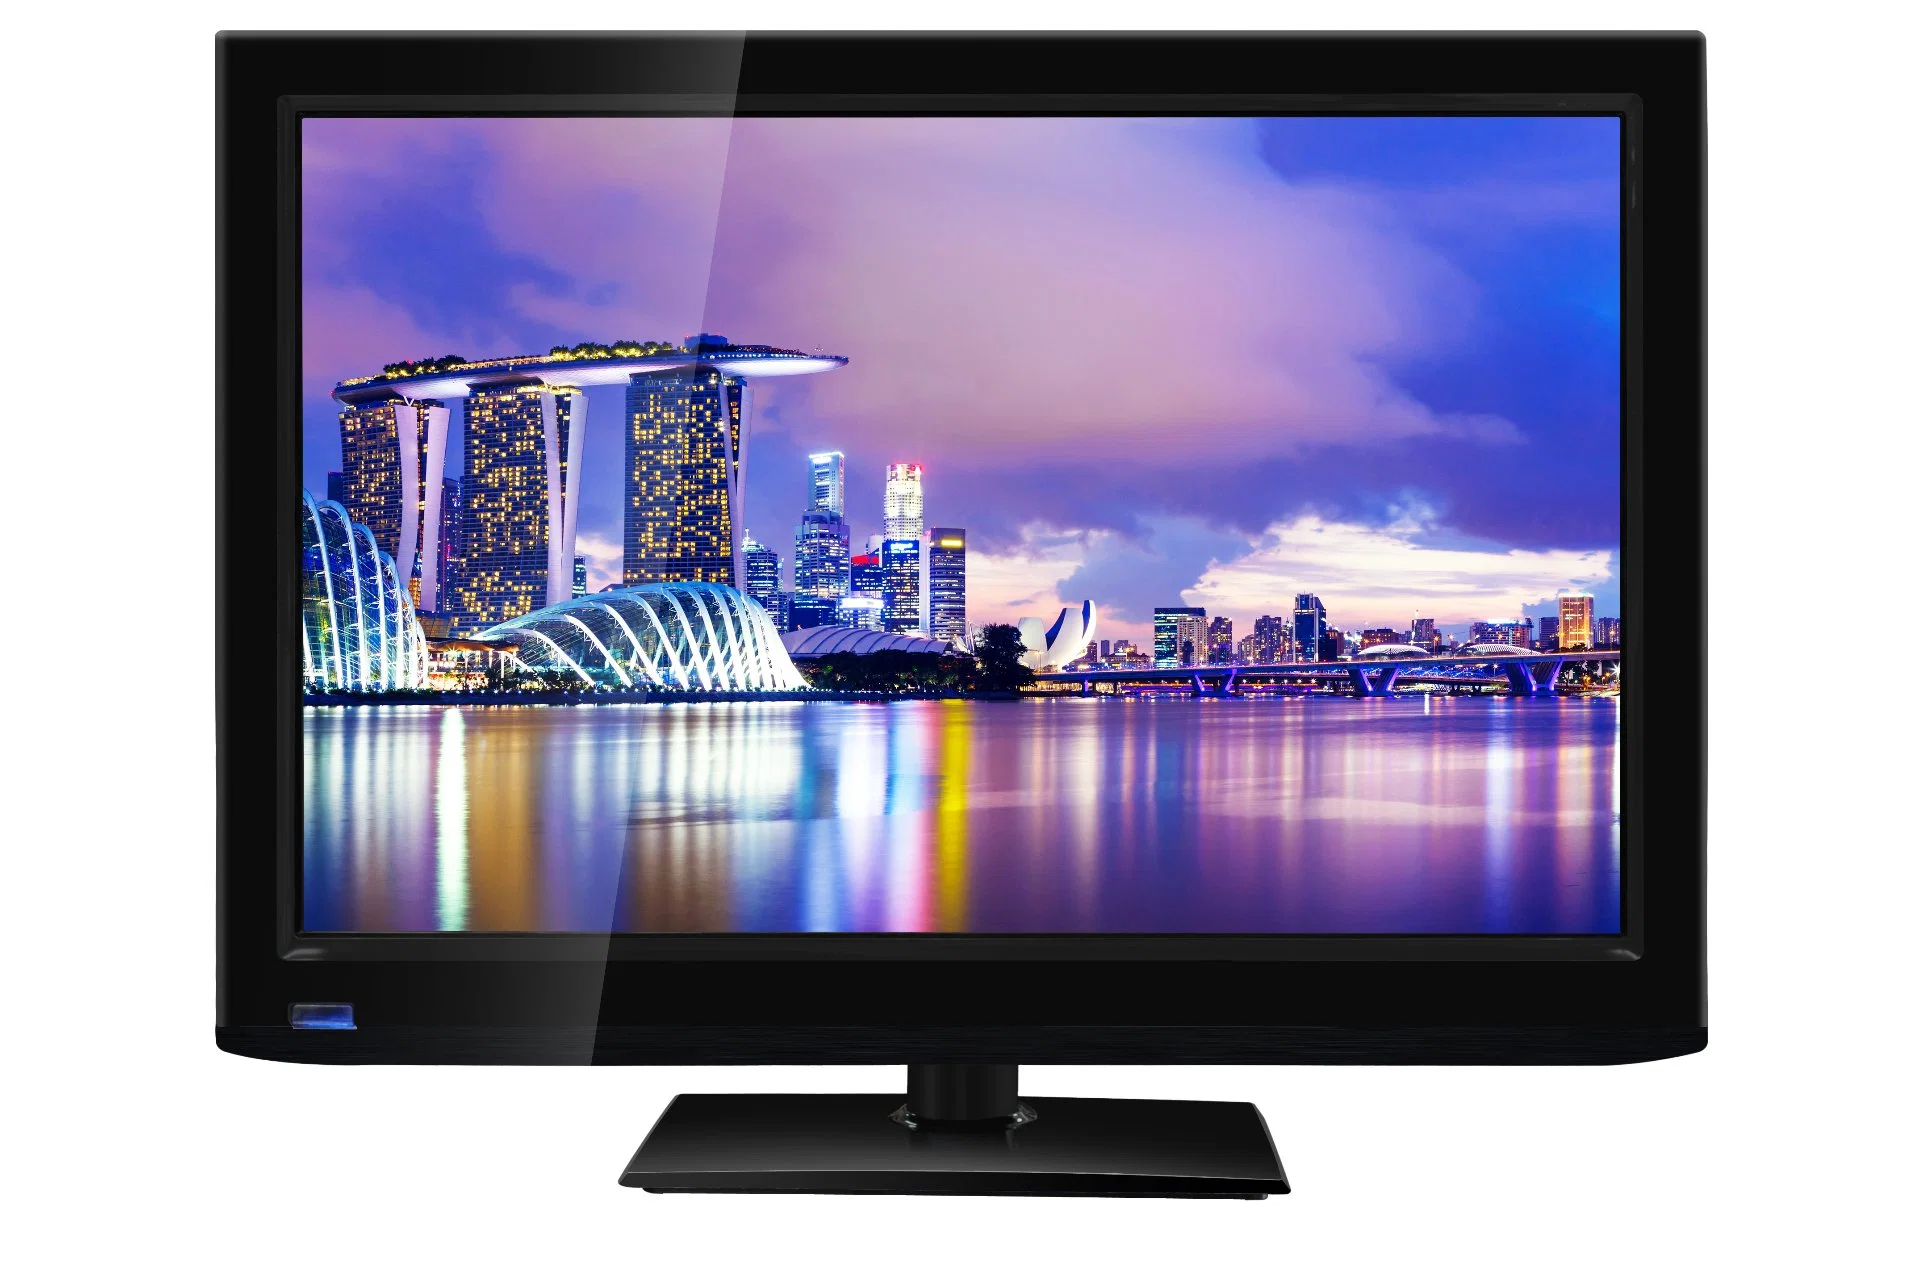 17 Inch TFT LCD Screen LED Backlight Color TV